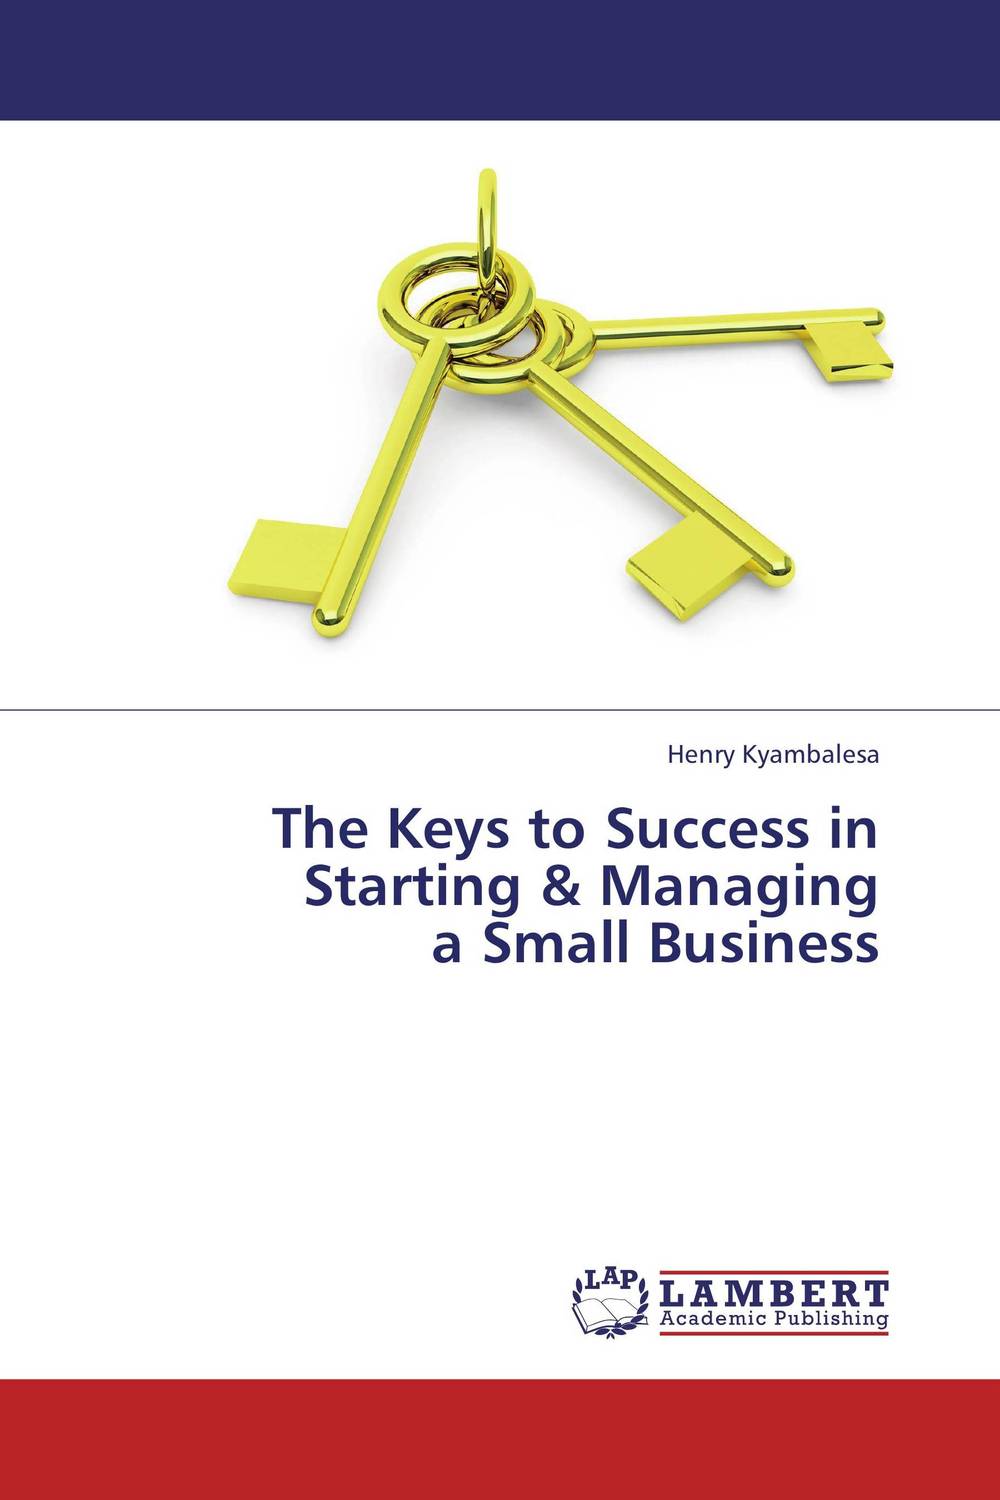 The Keys to Success in Starting & Managing a Small Business